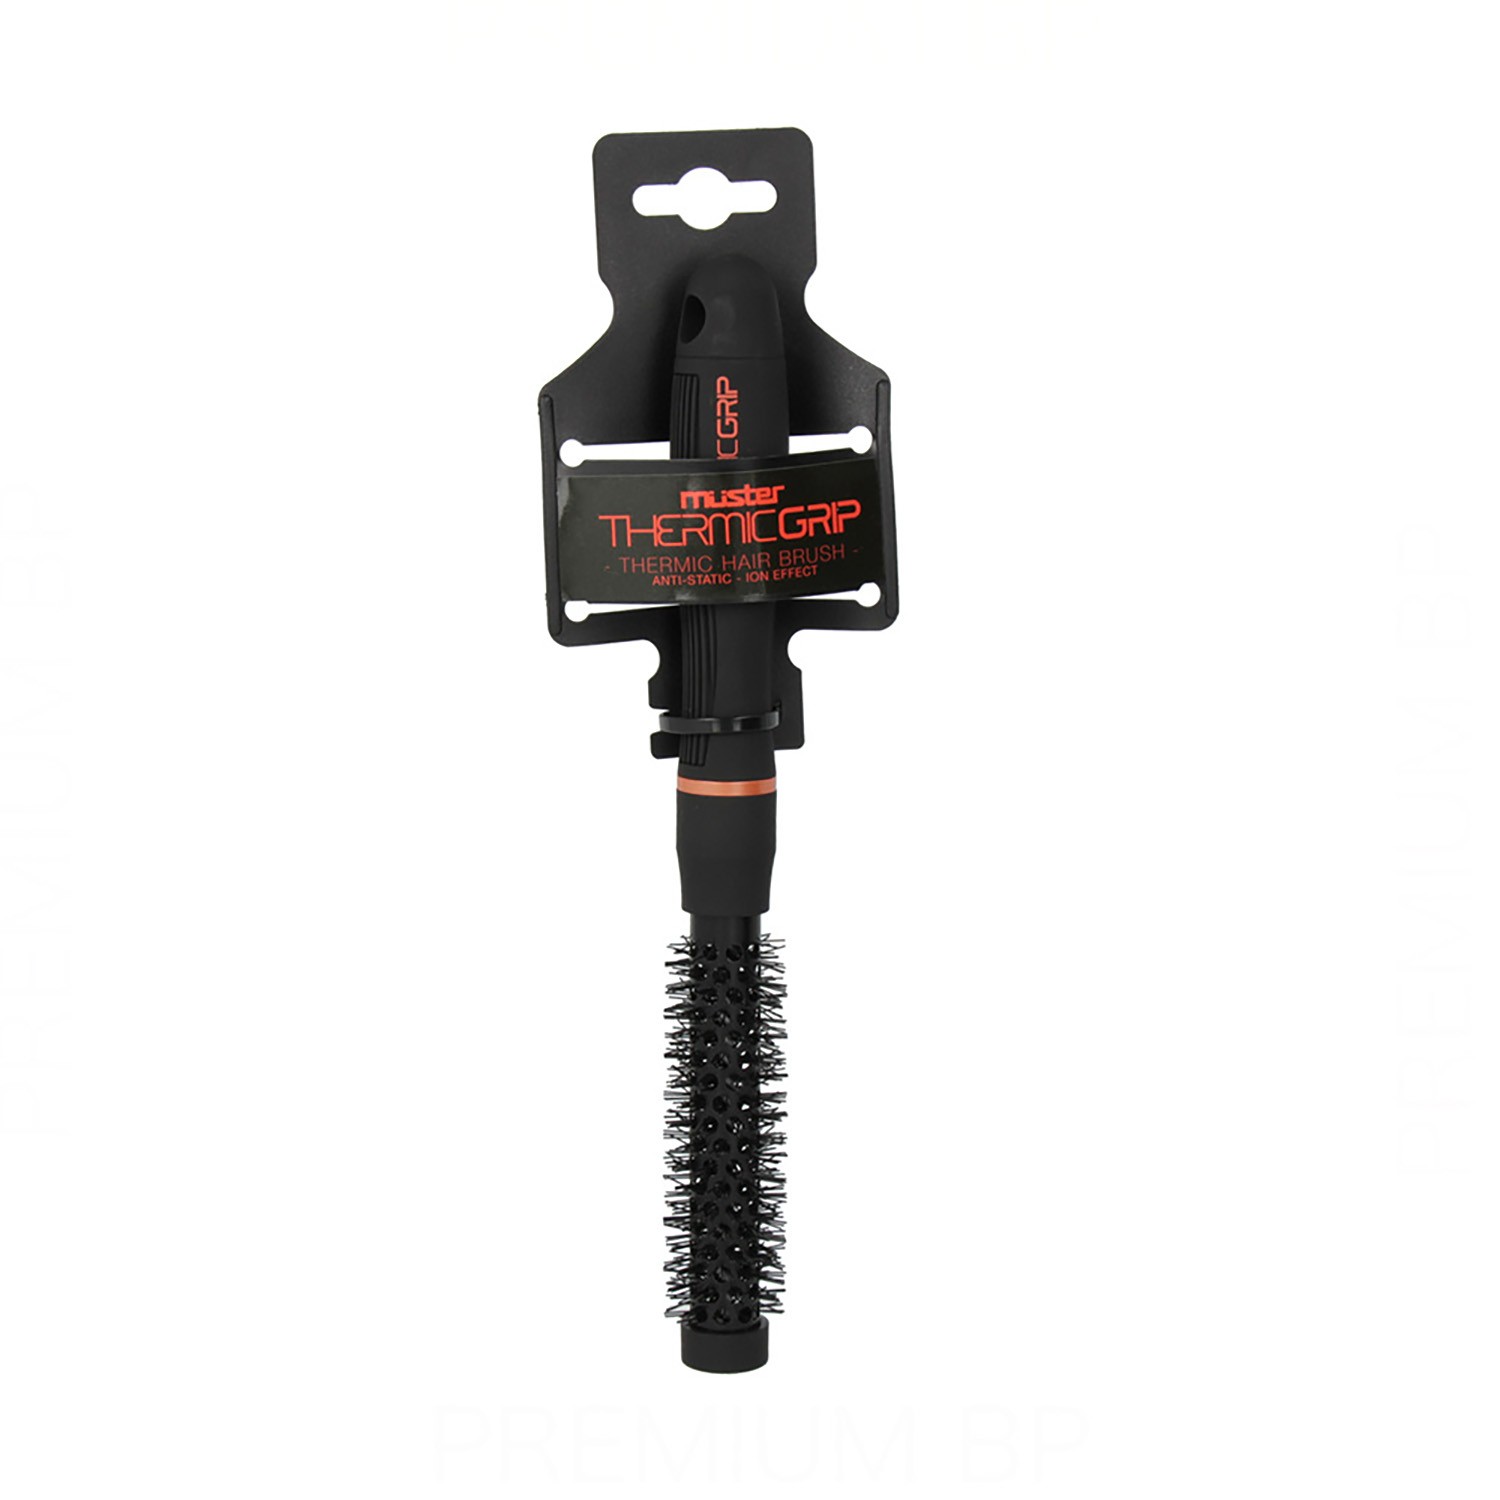 Muster Thermic Grip Spazzola Termica Professionale 28 mm